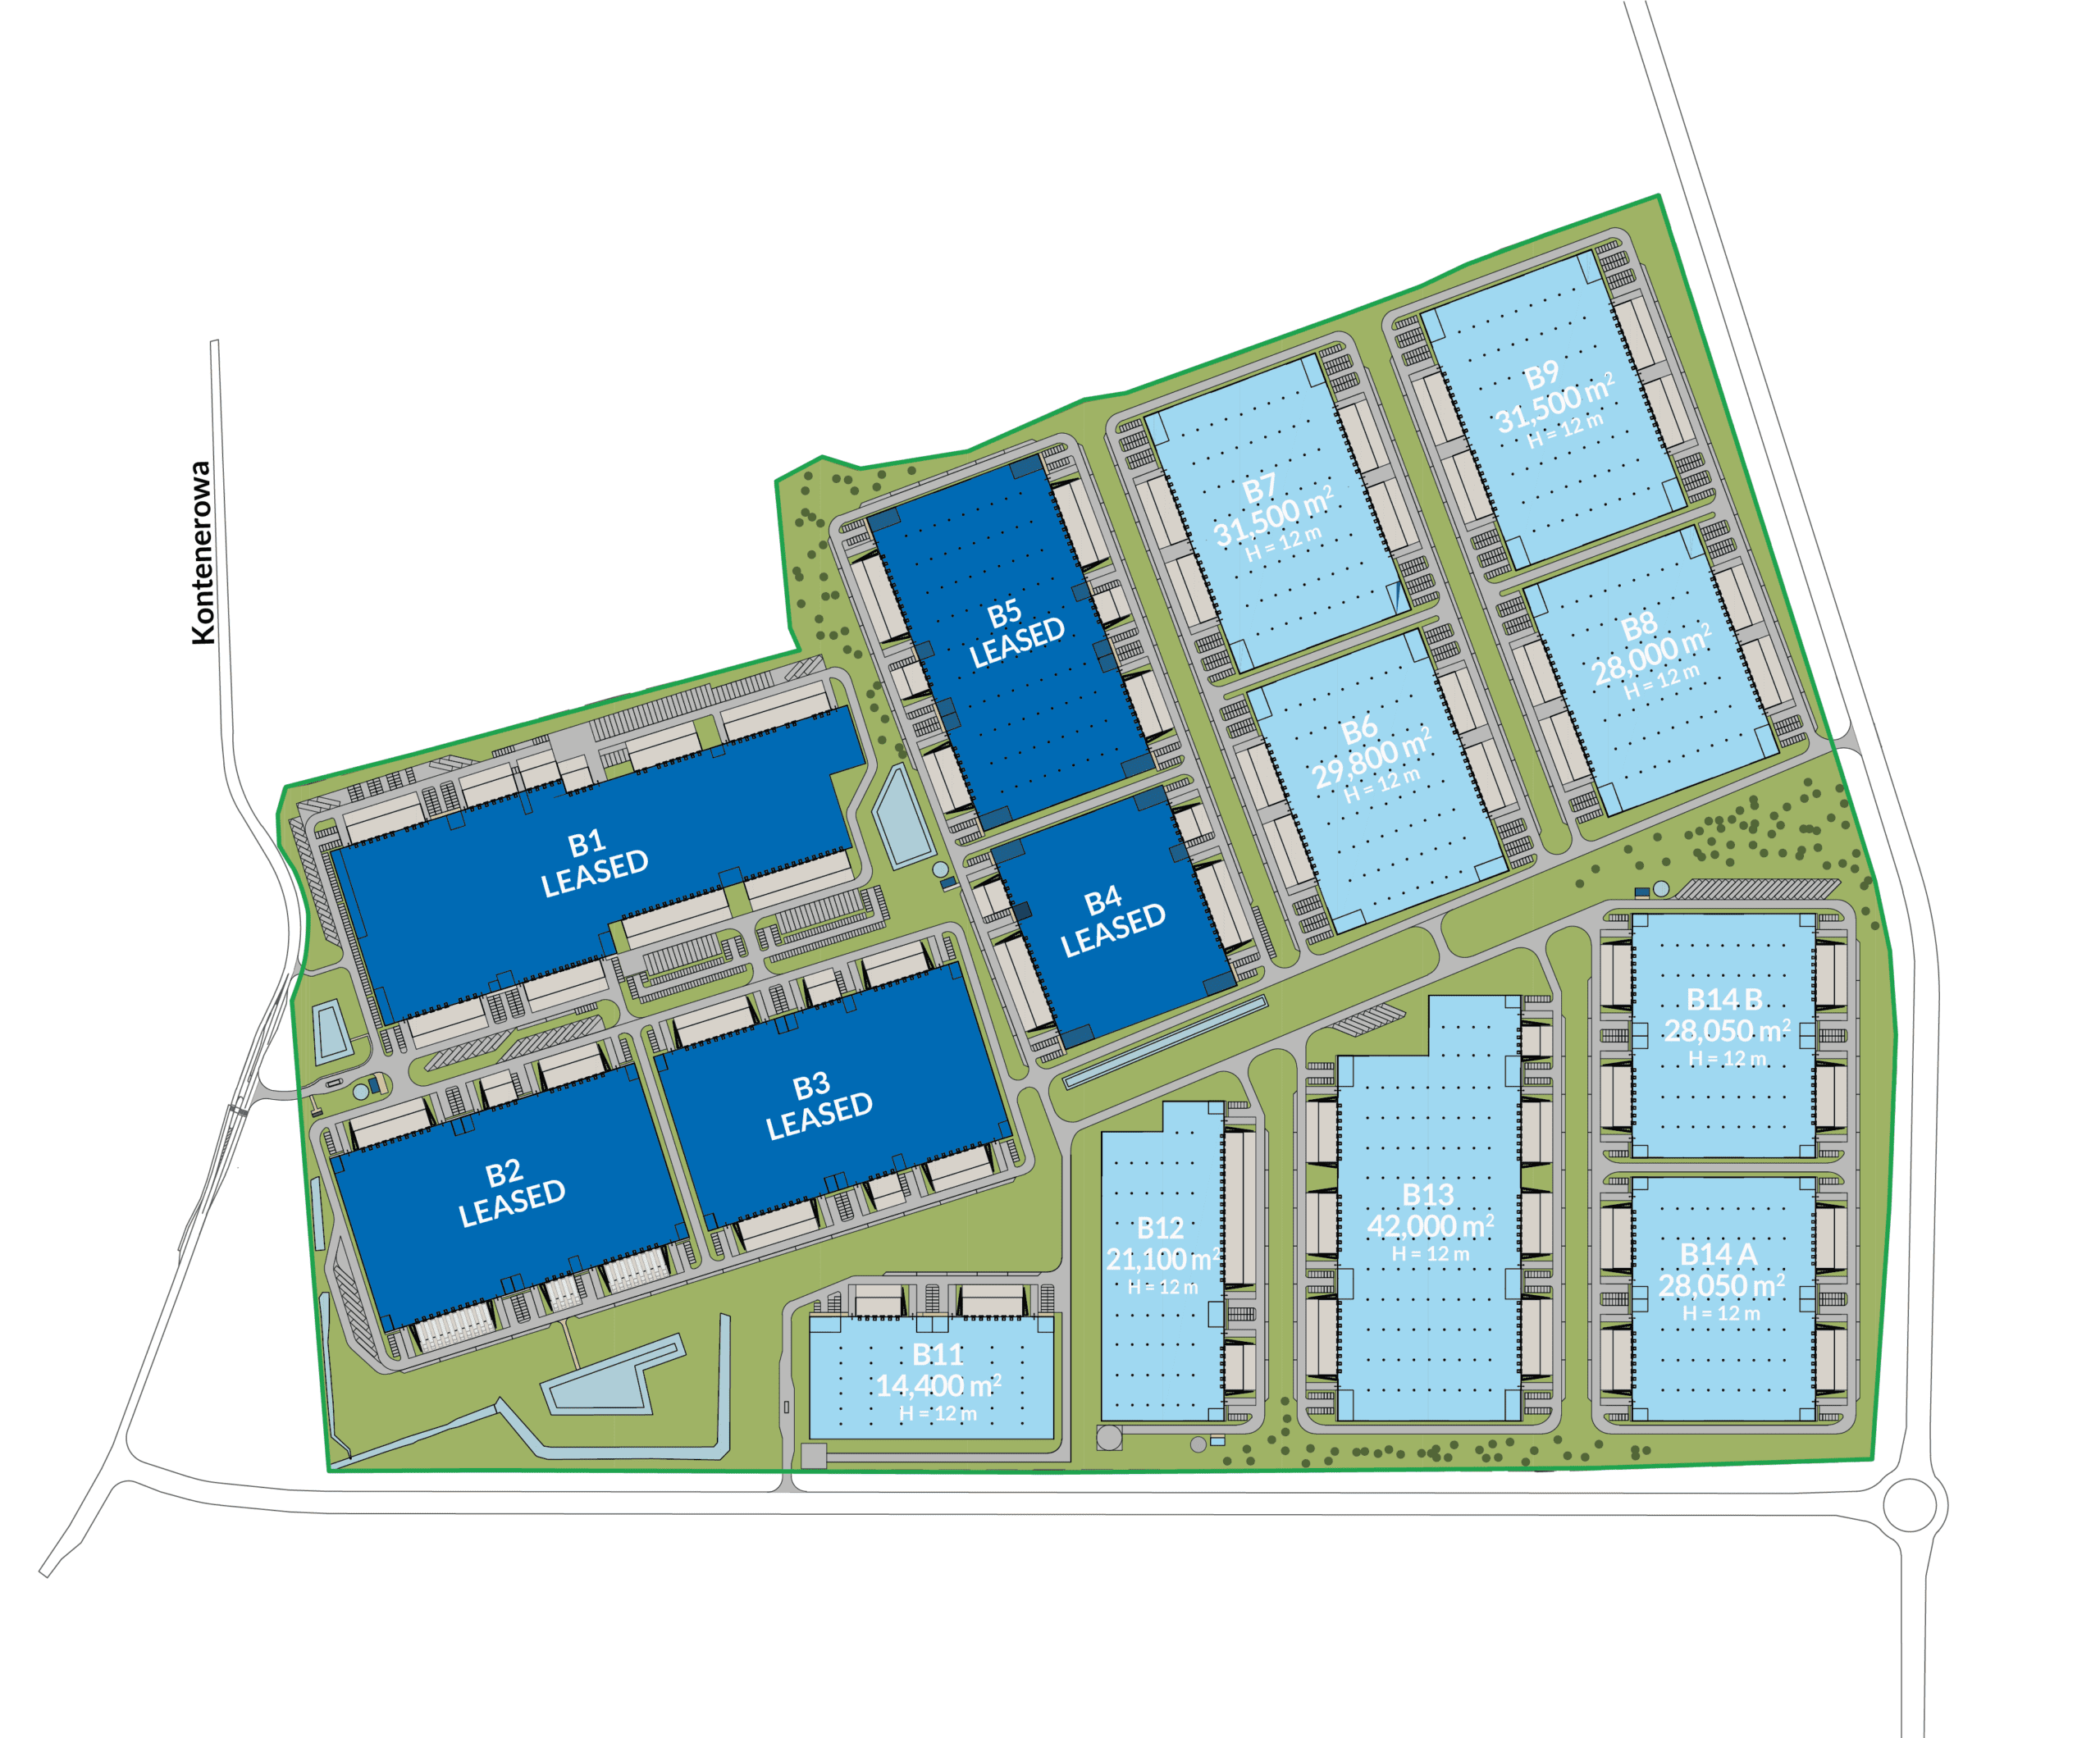 Site plan of warehouses, dark blue shaded ones are leased.